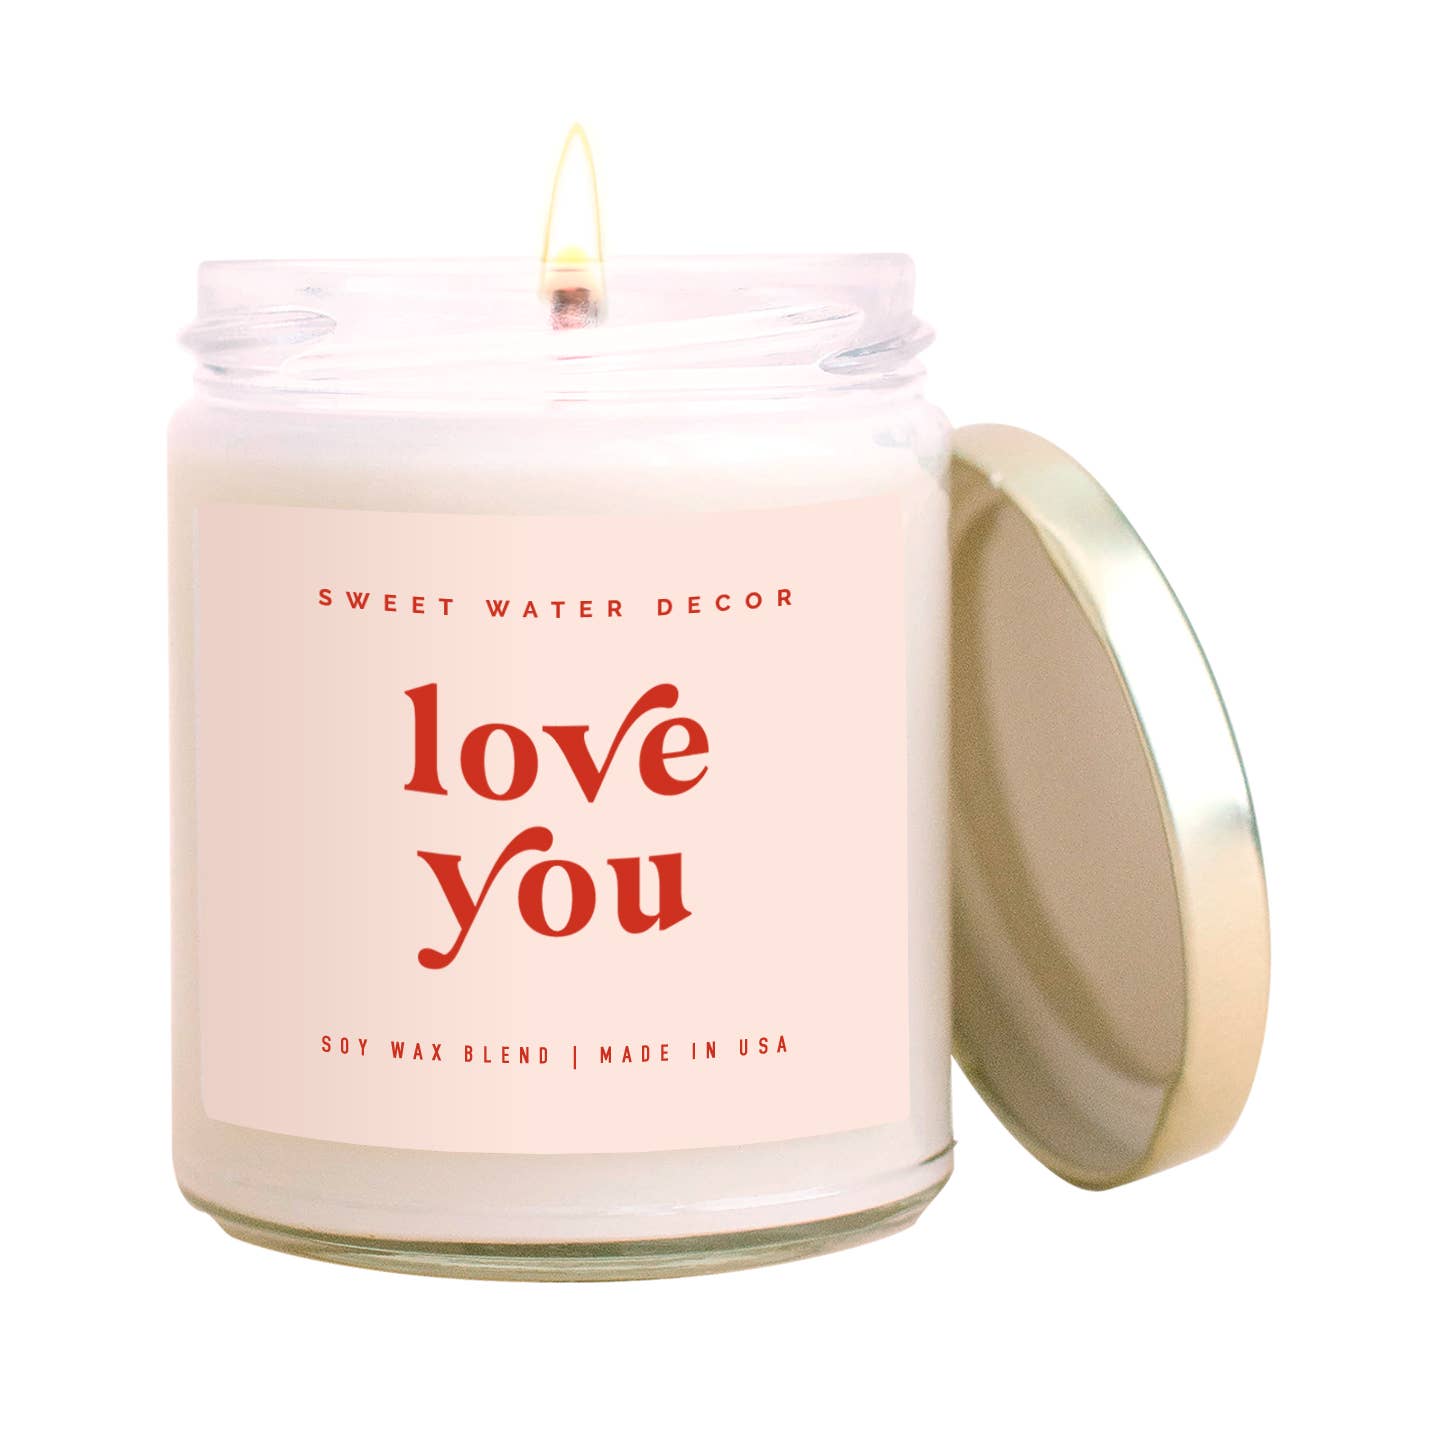 Sweet Water Decor Soy Candle - Love You